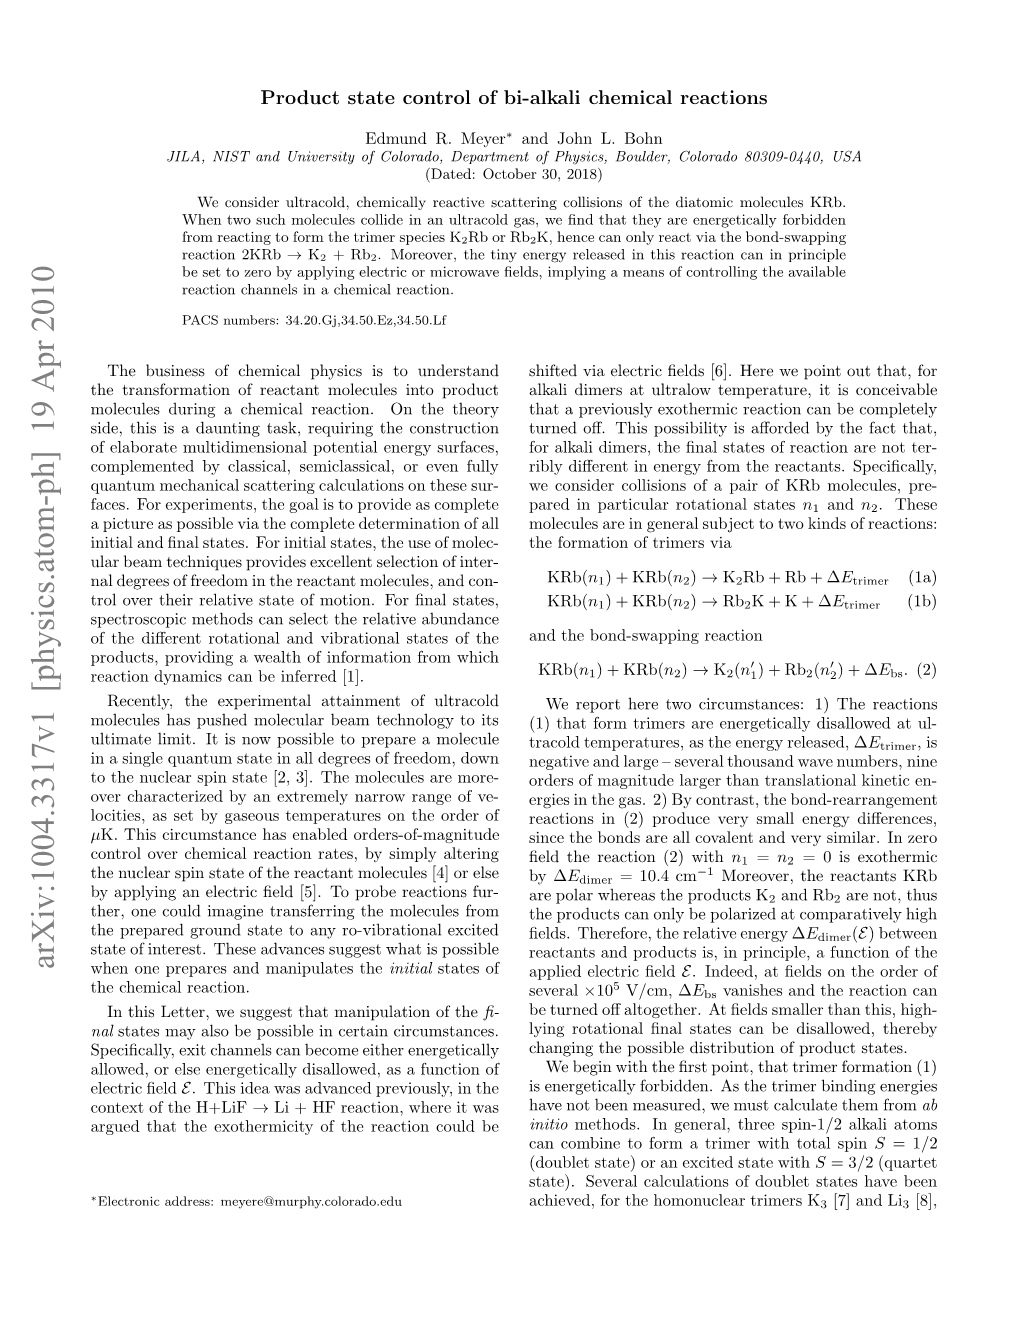 Product State Control of Bi-Alkali Chemical Reactions